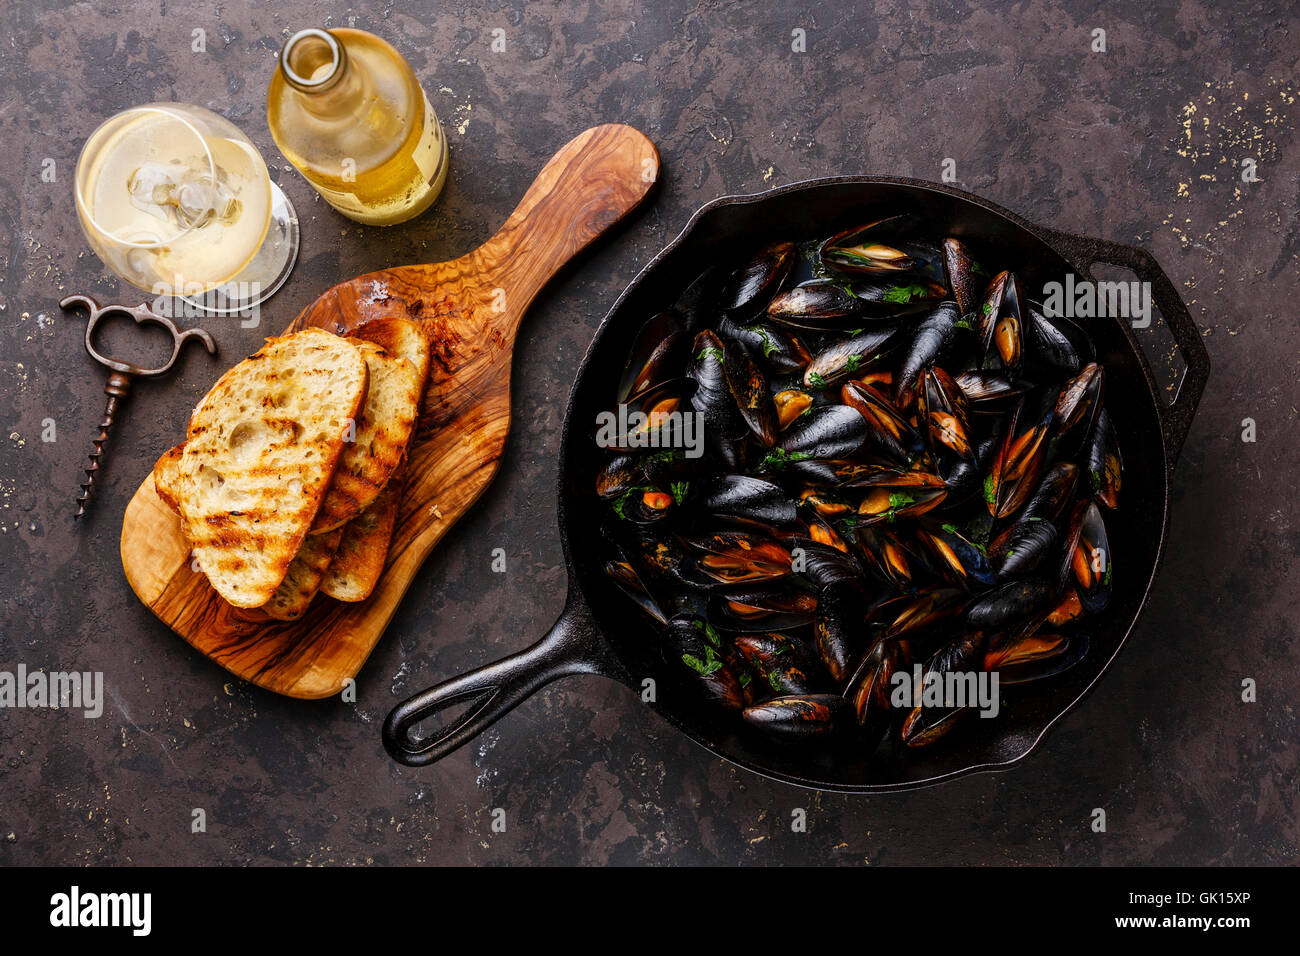 Mussels on frying pan, Bread toasts and Wine on dark background Stock Photo